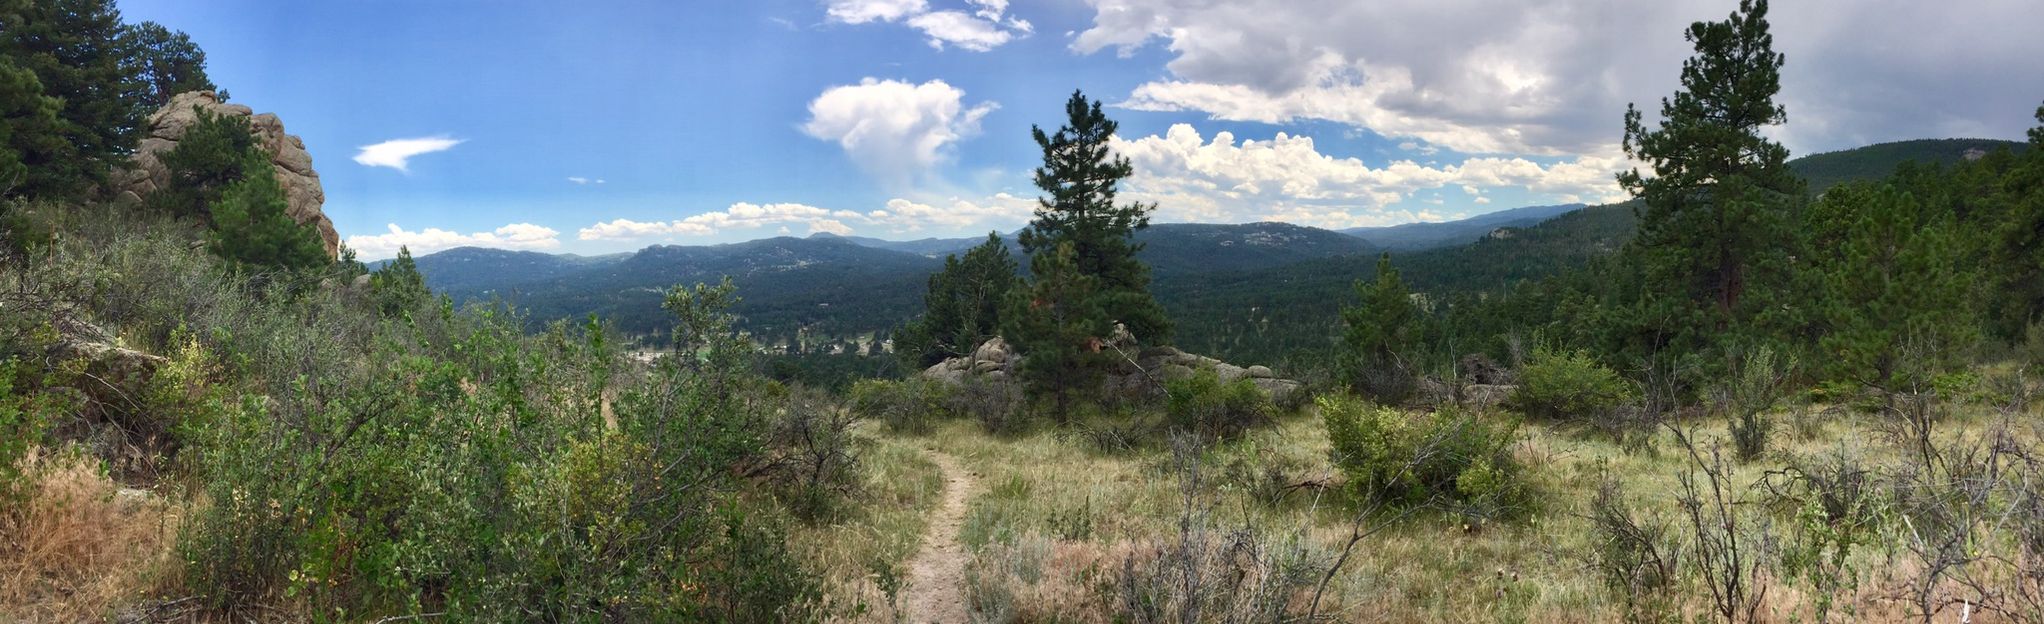 Hidden Fawn to Mount Muhly Trail Loop - Colorado | AllTrails